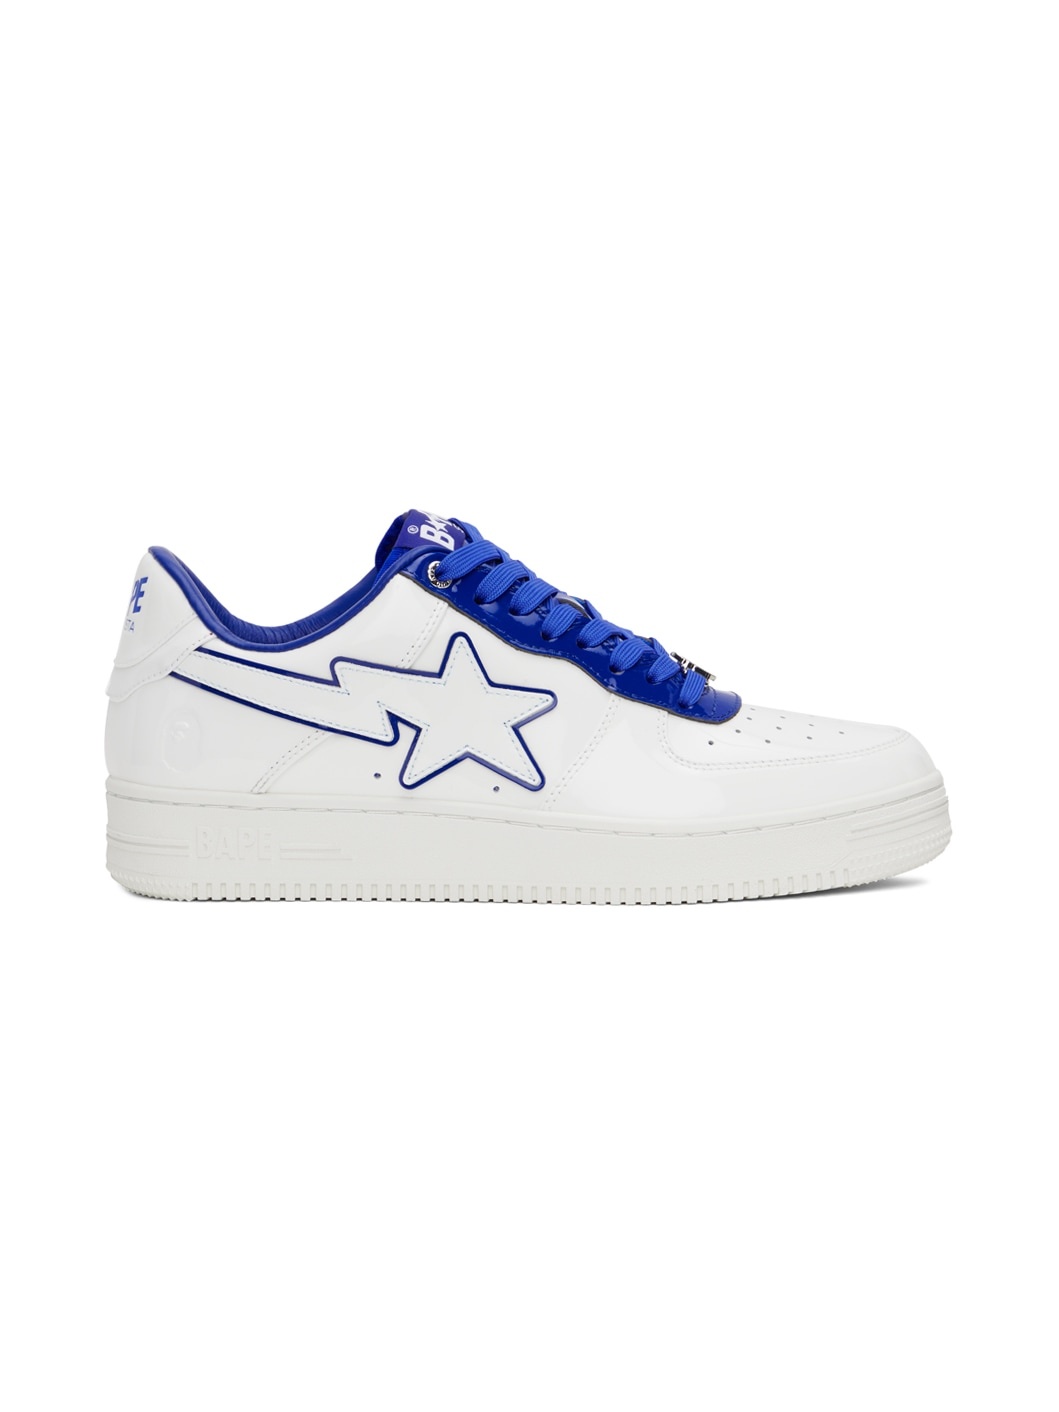 White & Navy Patent Leather Sneakers - 1